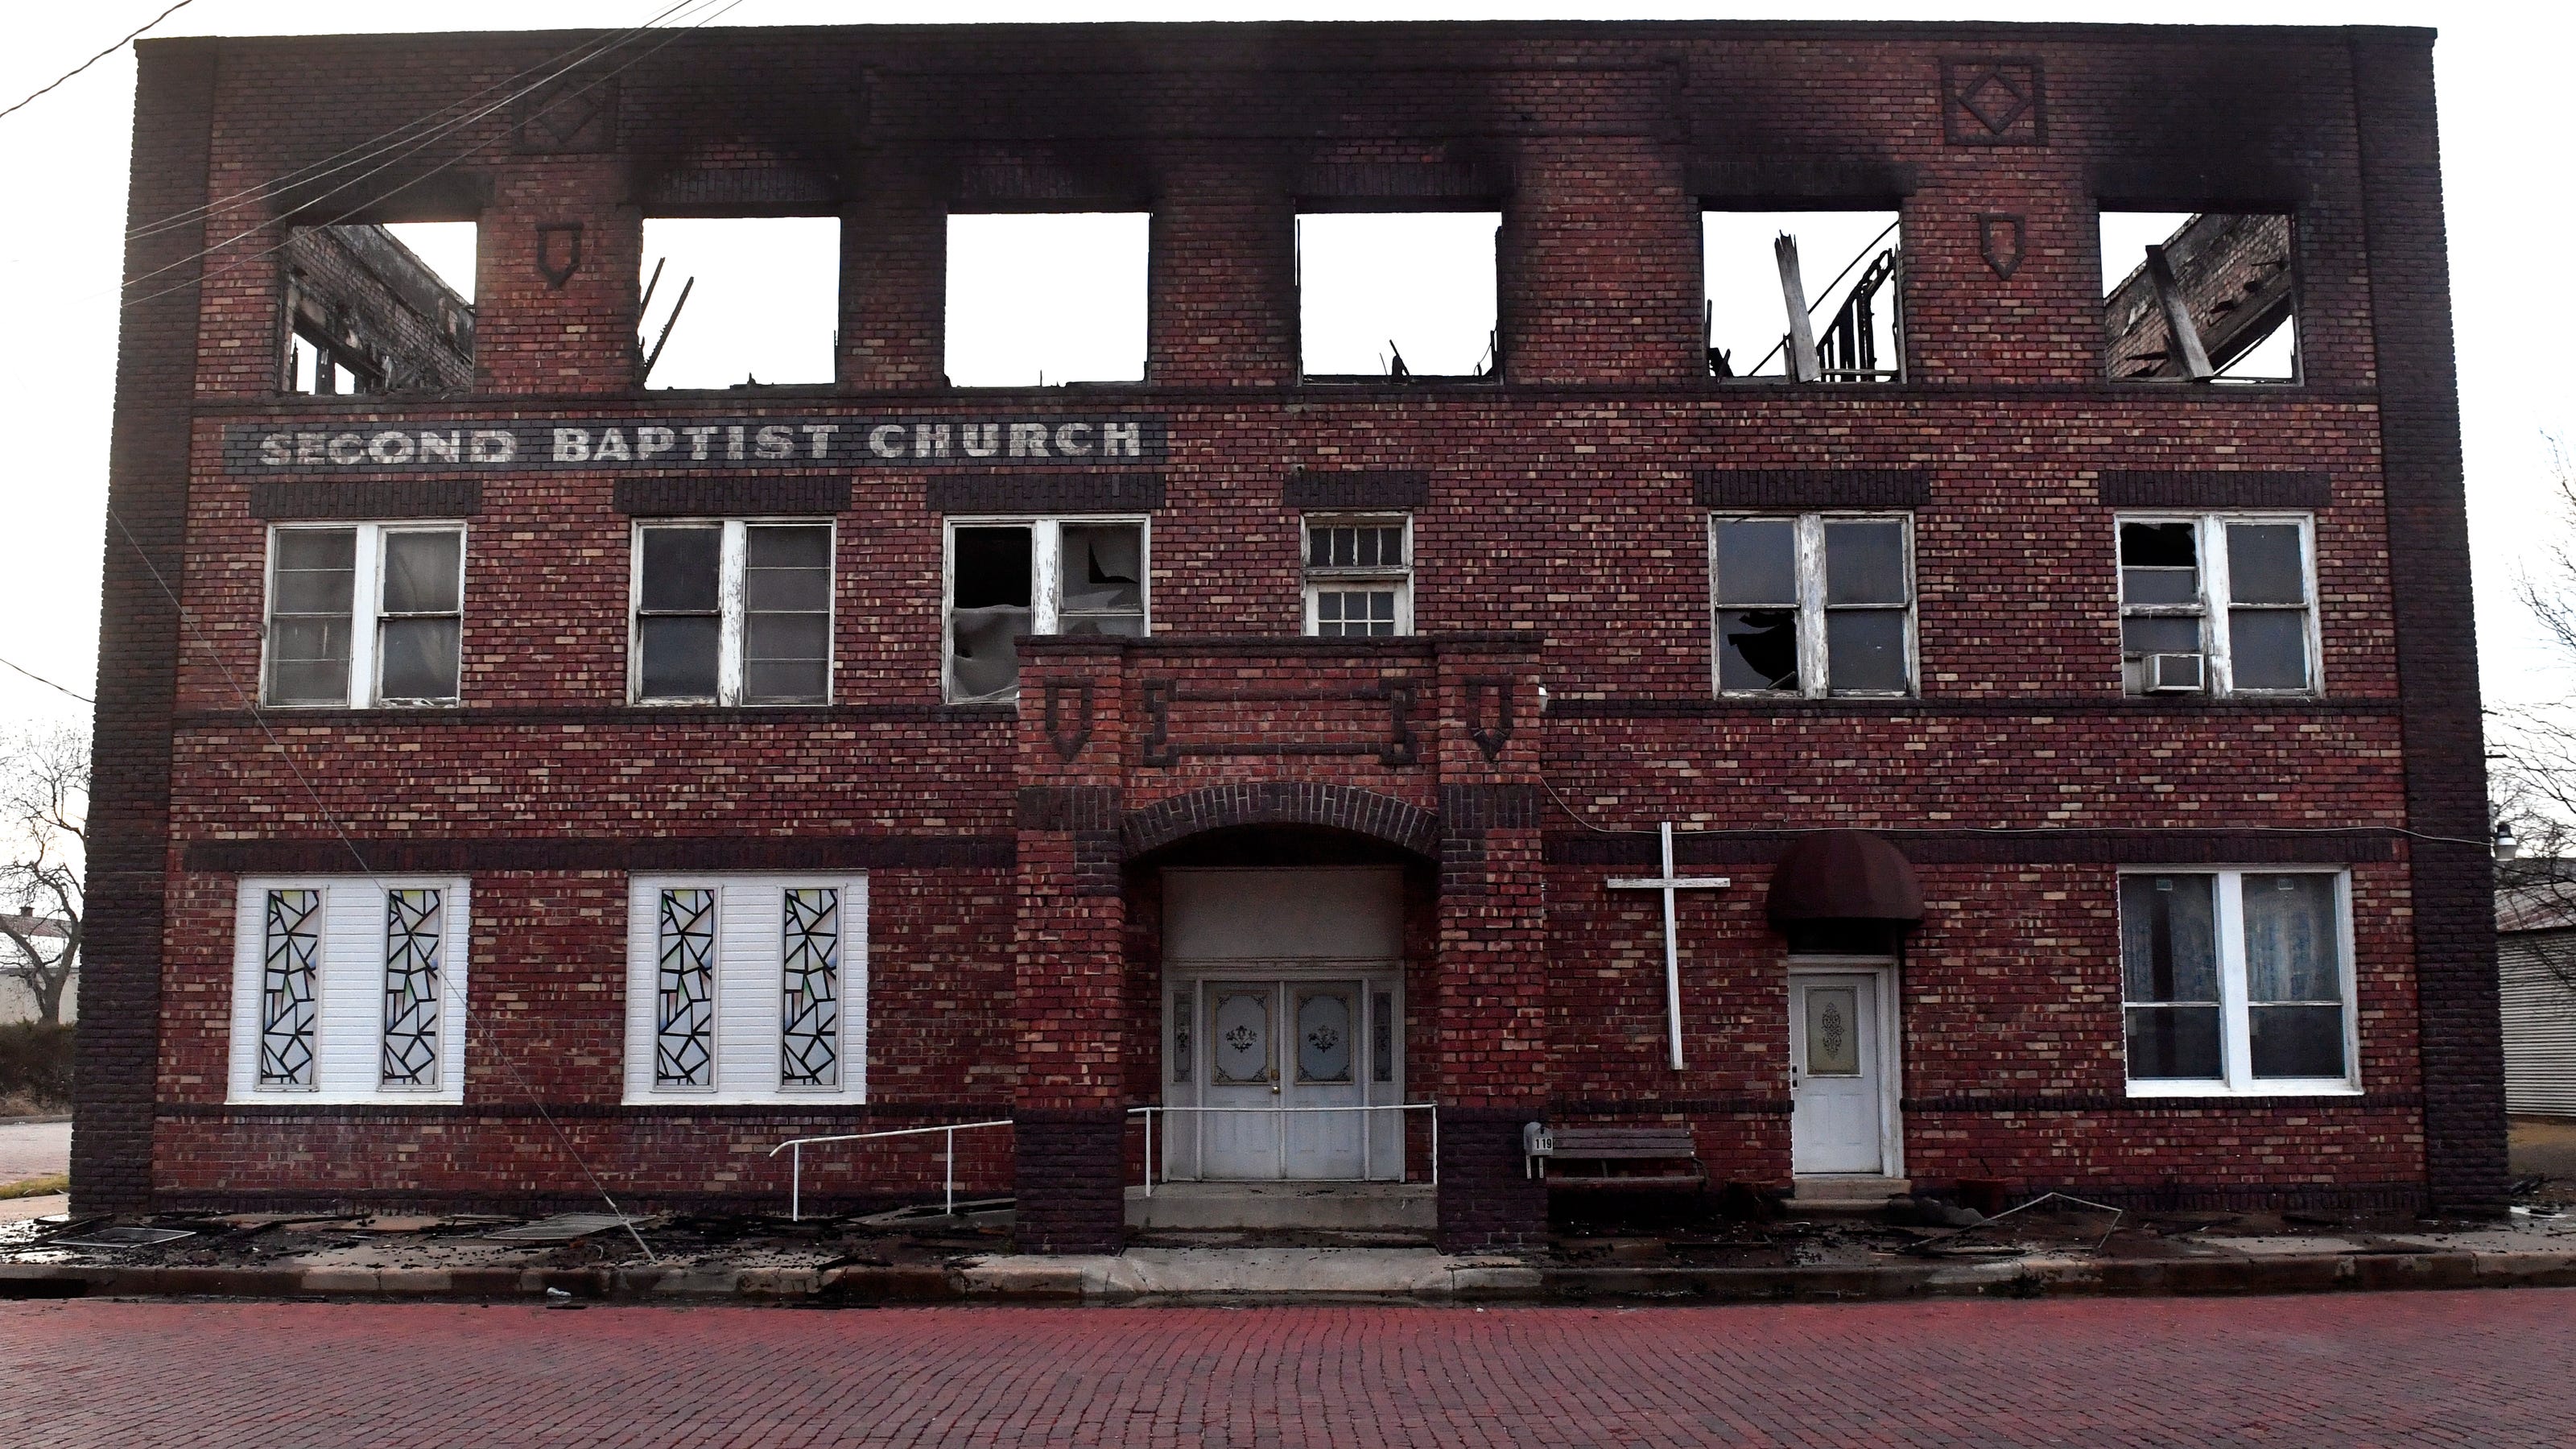  Arson charges dropped against Ranger man in connection with Second Baptist Church fire 